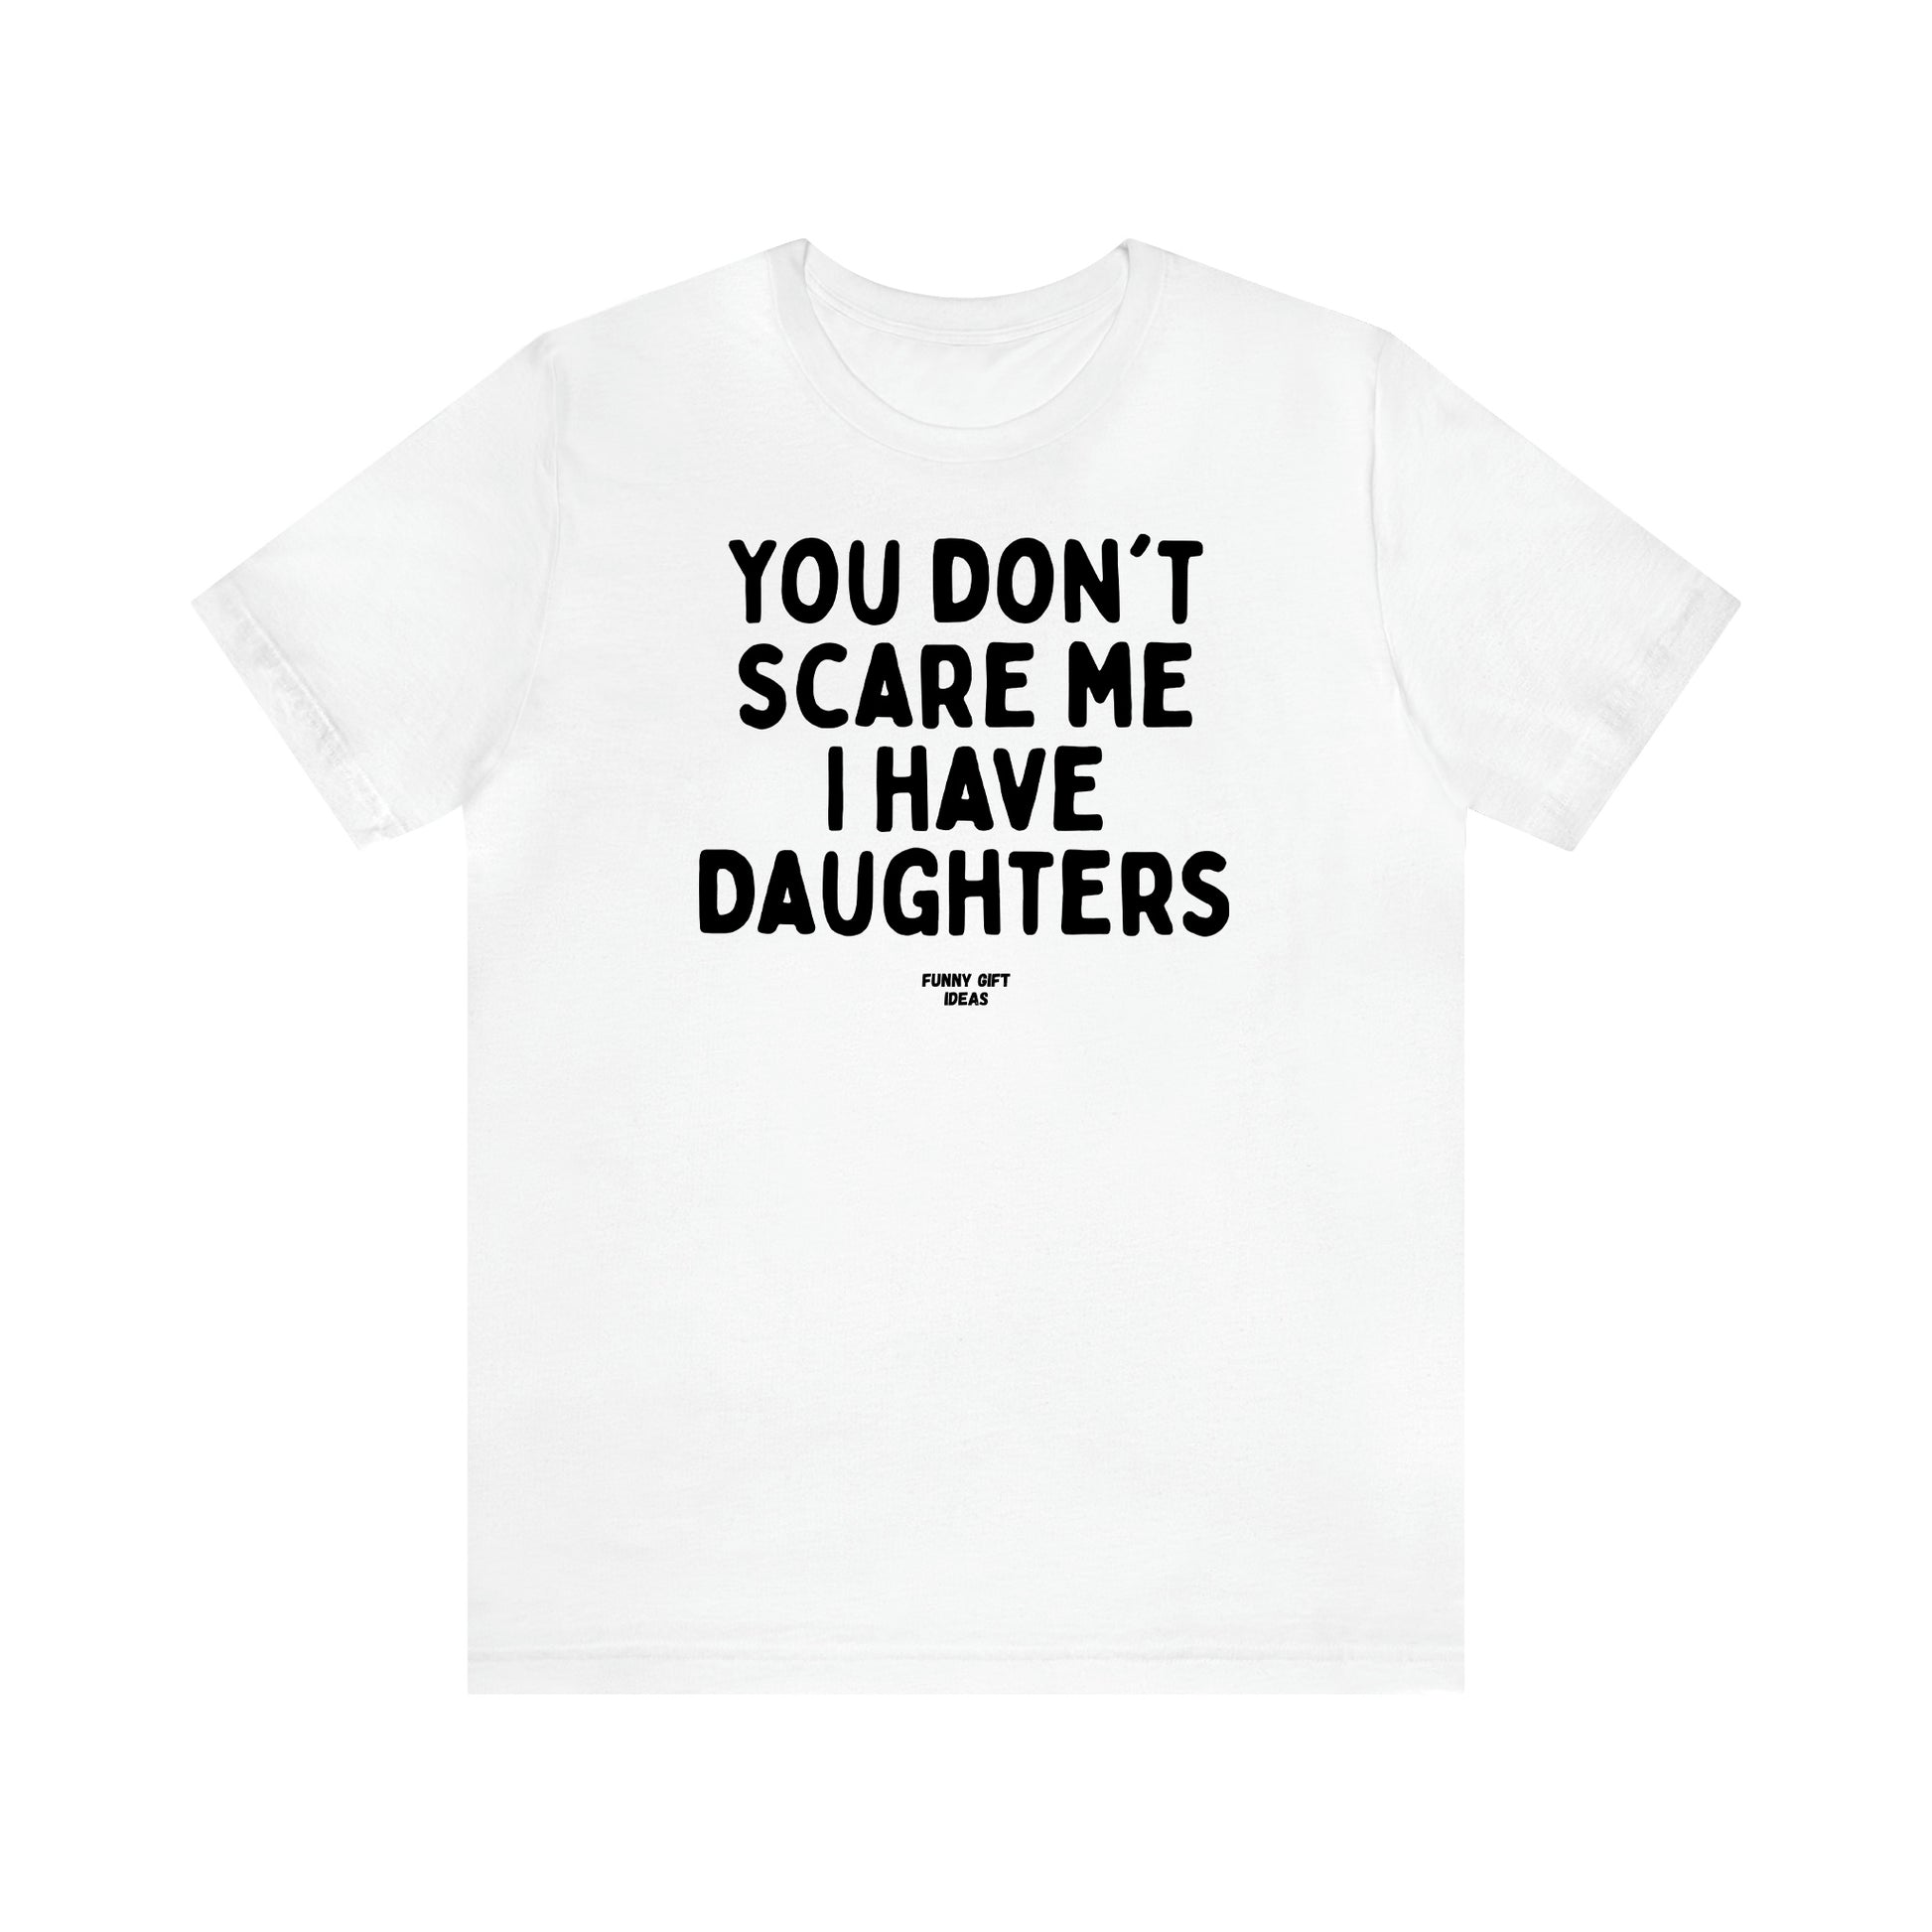 Women's T Shirts You Don't Scare Me I Have Daughters - Funny Gift Ideas